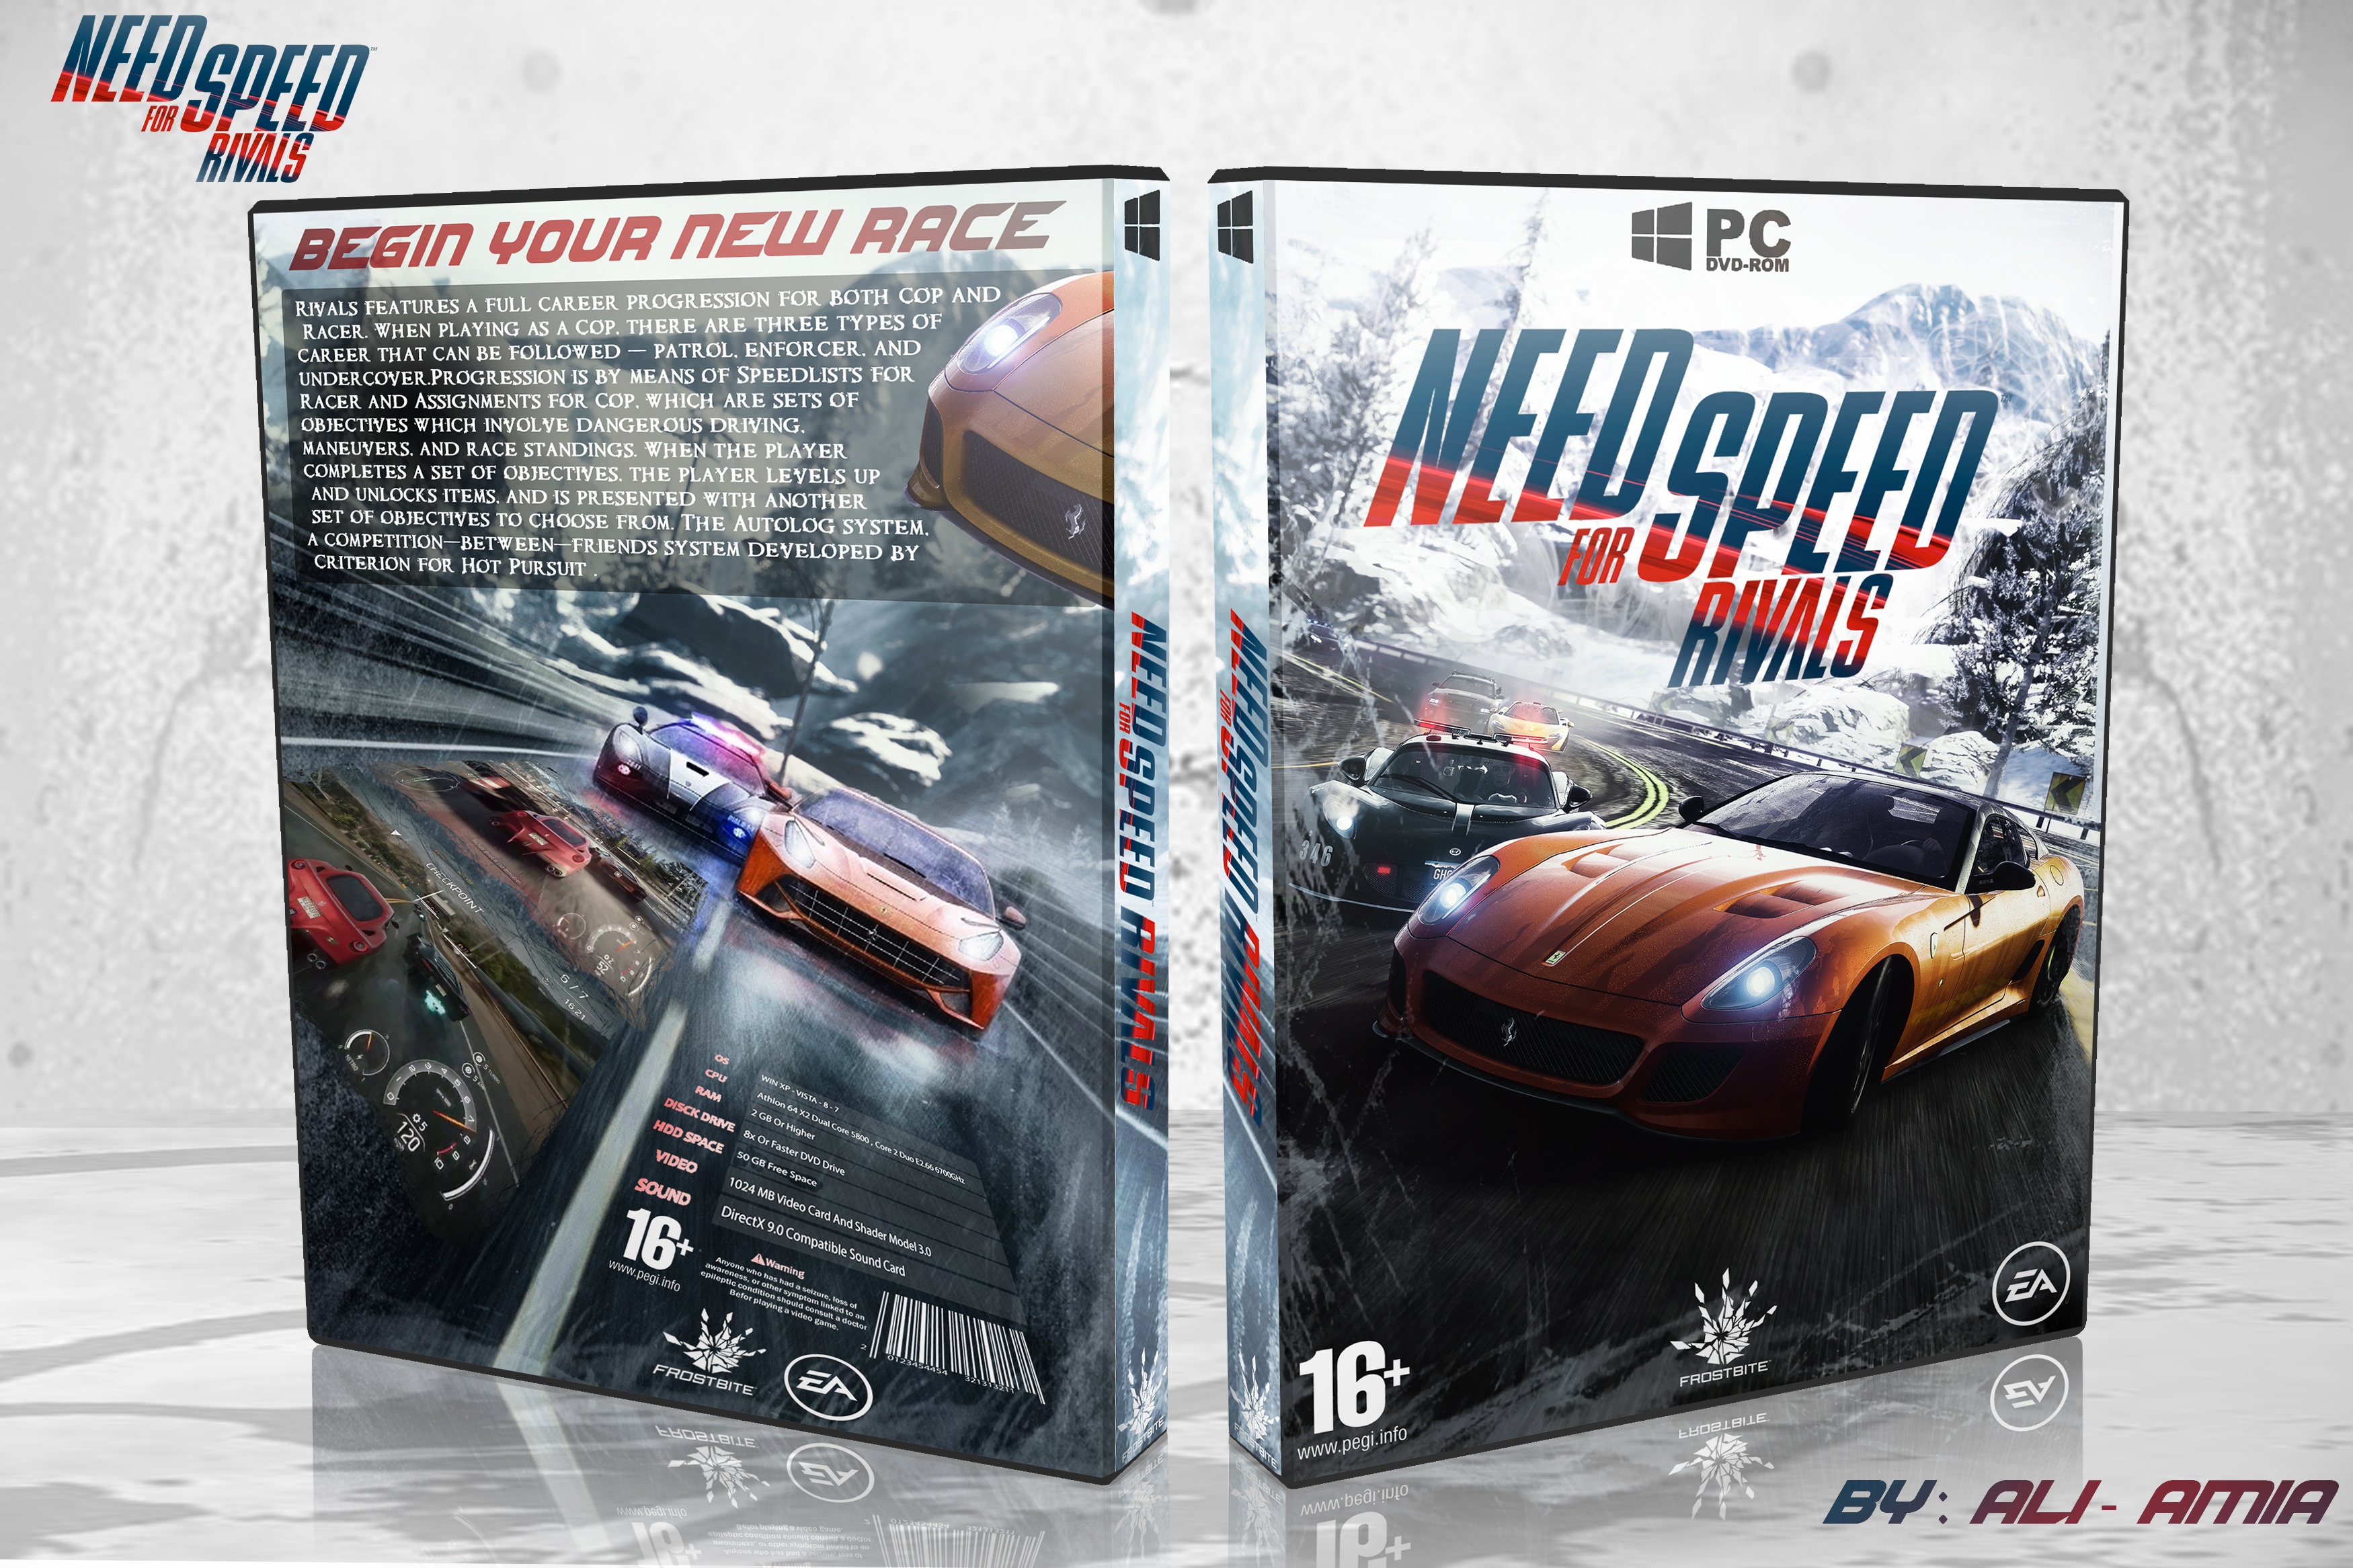 Rivals ps4. Need for Speed Rivals ps4 диск. NFS Rivals ps3 обложка. Need for Speed Rivals ps3 диск. Need for Speed Rivals ps4 упаковка.